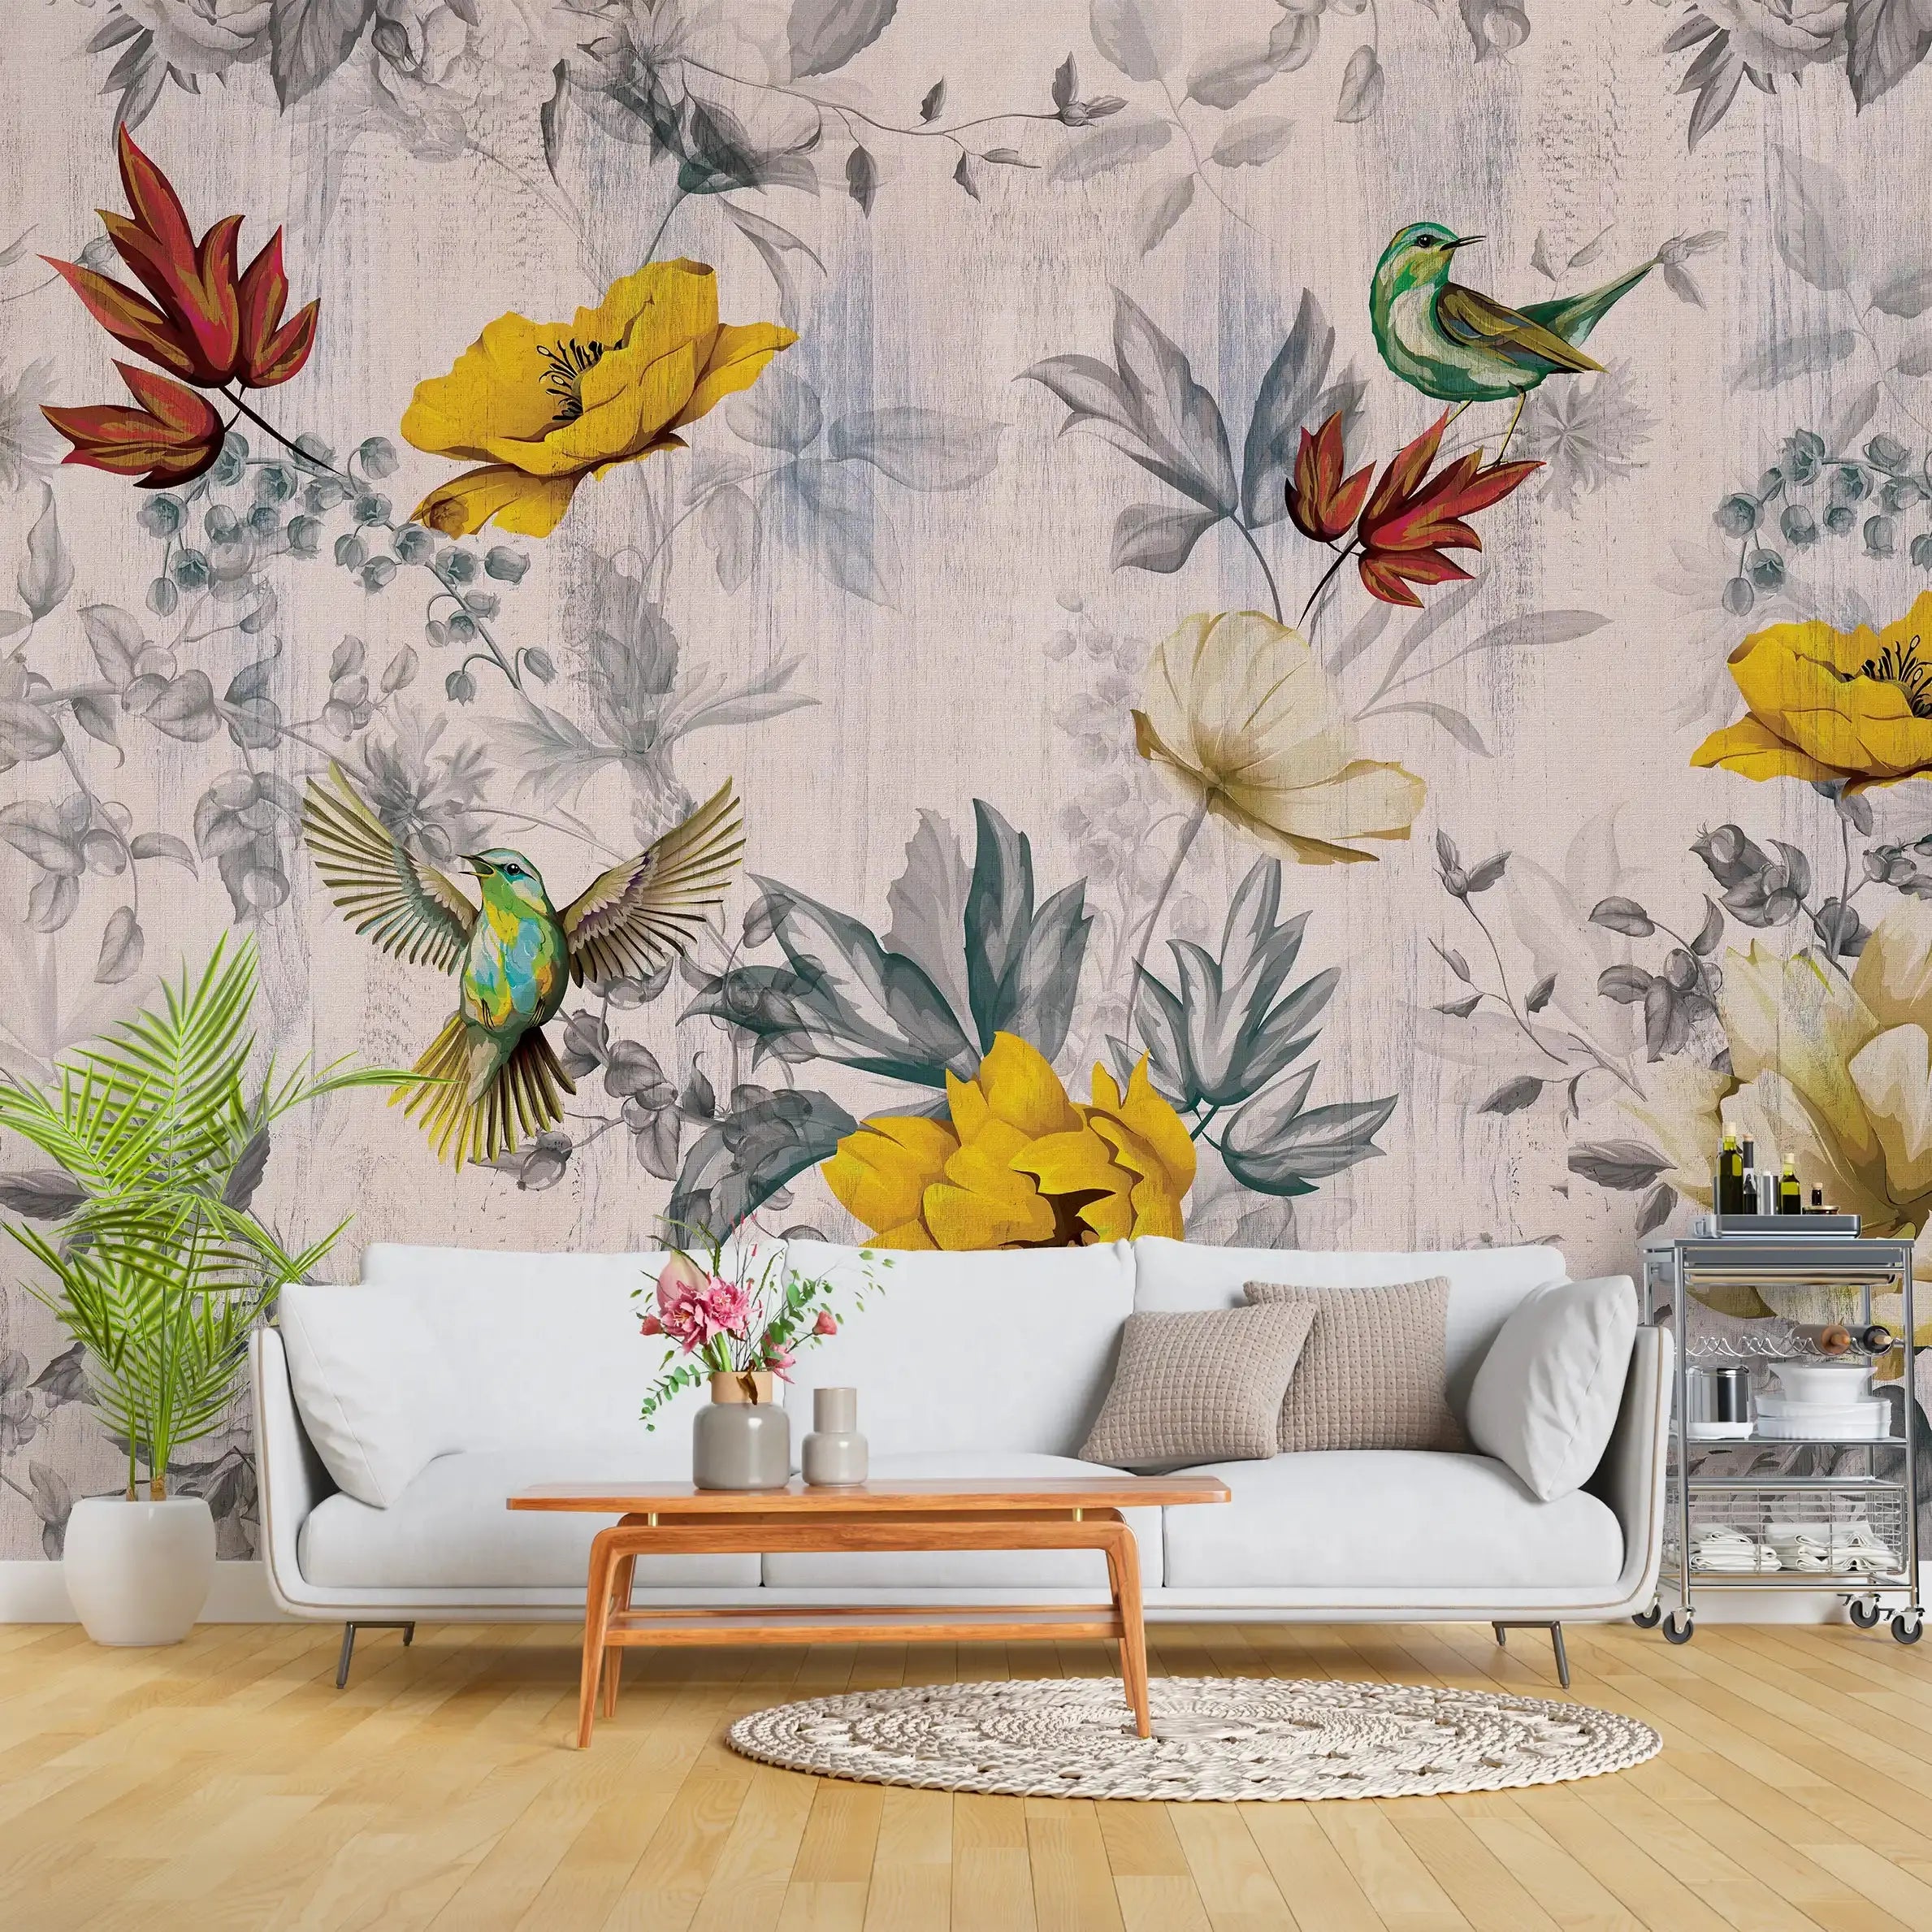 3041-C / Removable Tropical Leaf Wallpaper: Peel and Stick Vintage Red Floral Mural with Birds, Ideal for Nursery, Kitchen & Bathroom - Artevella